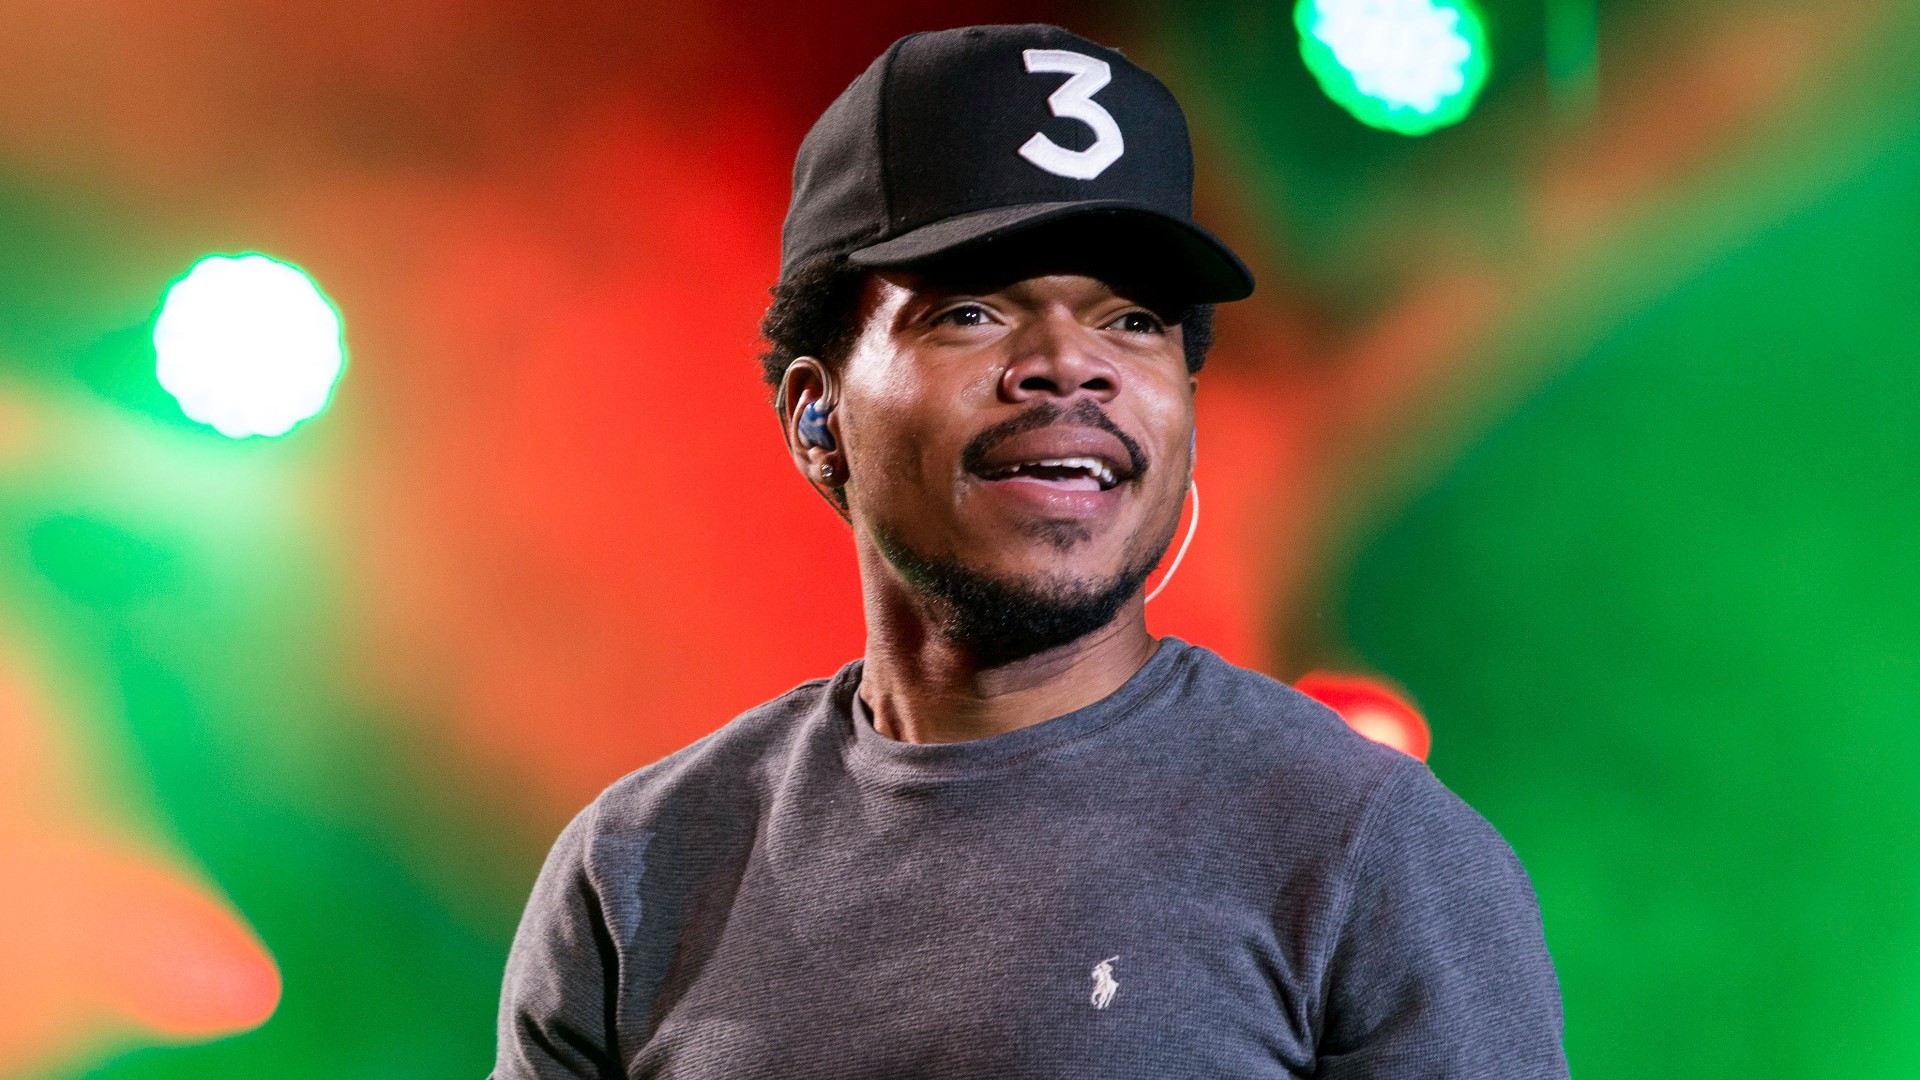 "It was pretty surreal. I didn't expect it," Chance the Rapper said of getting the call to be a coach.